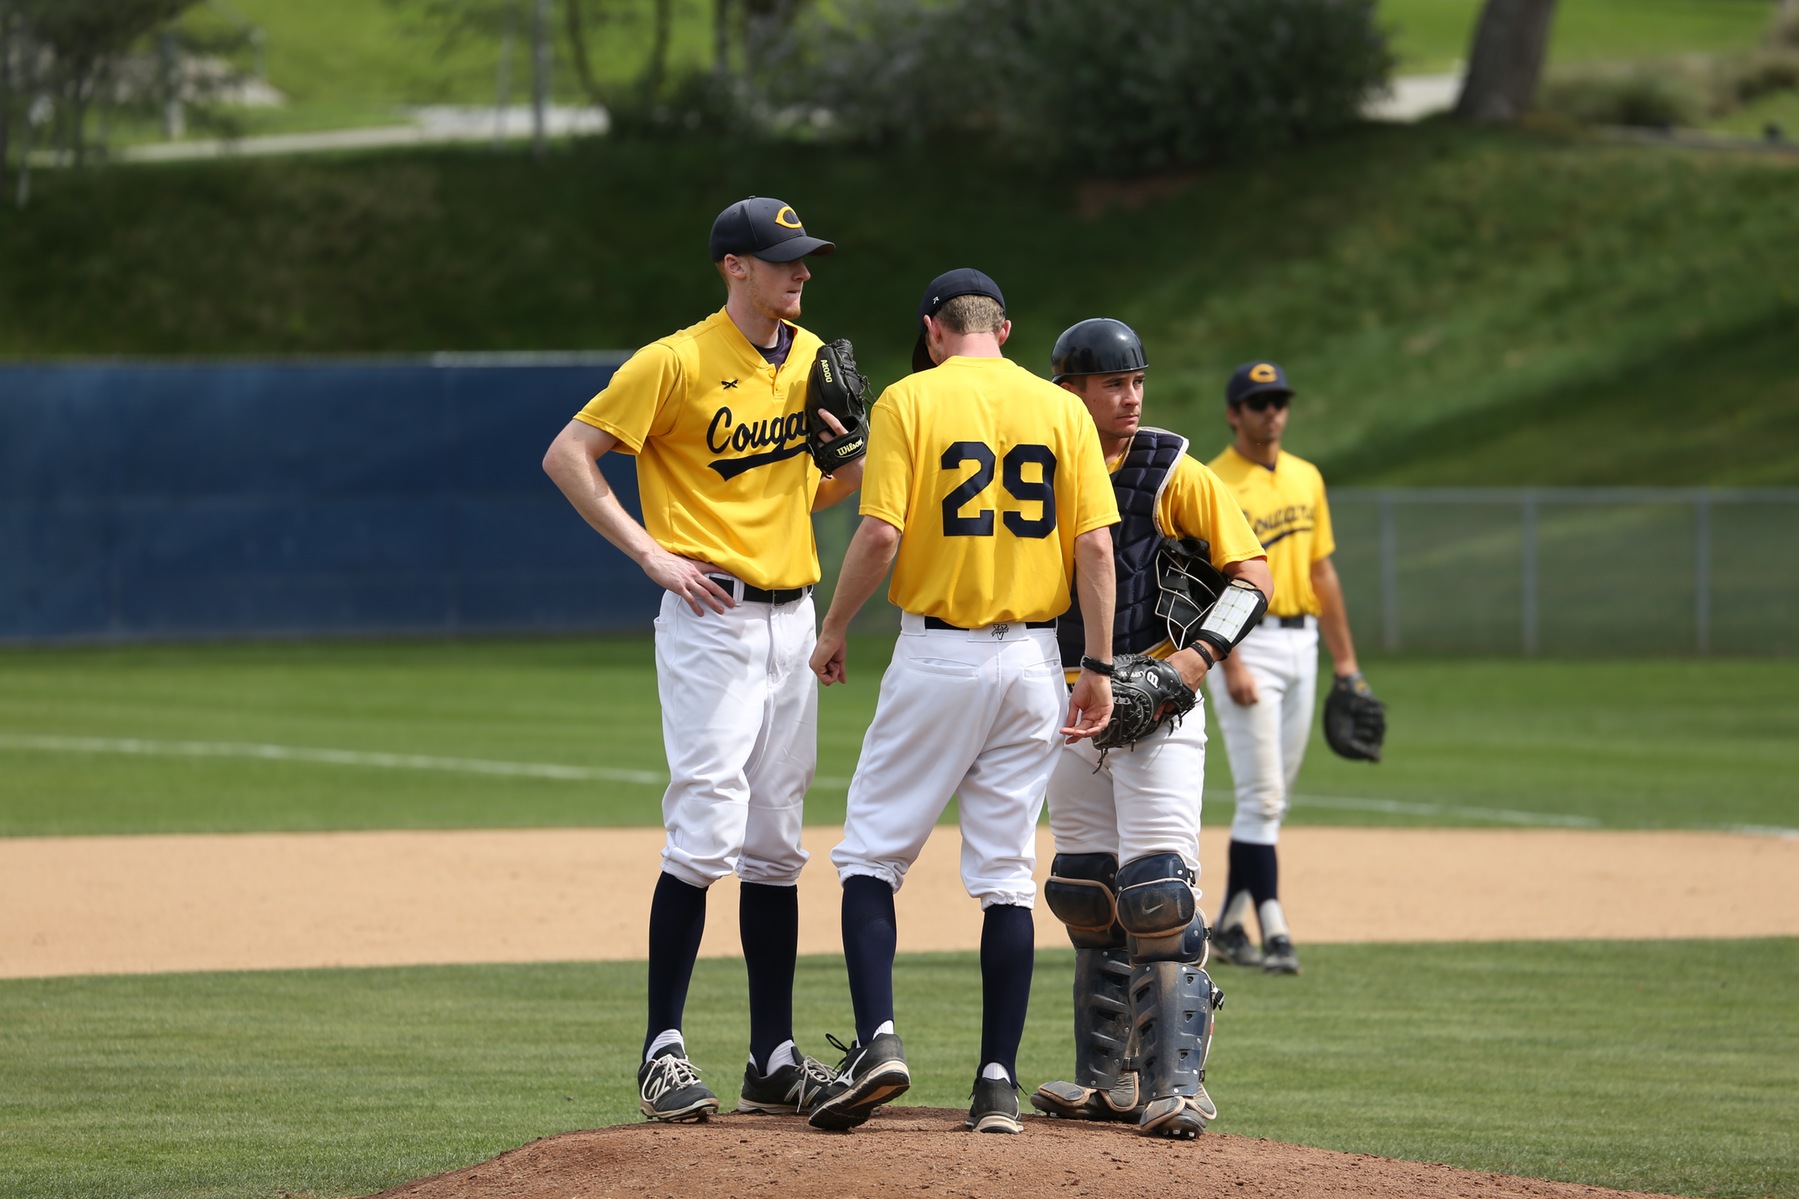 Canyons Lets Early Lead Slip Away in 7-4 Loss to Glendale